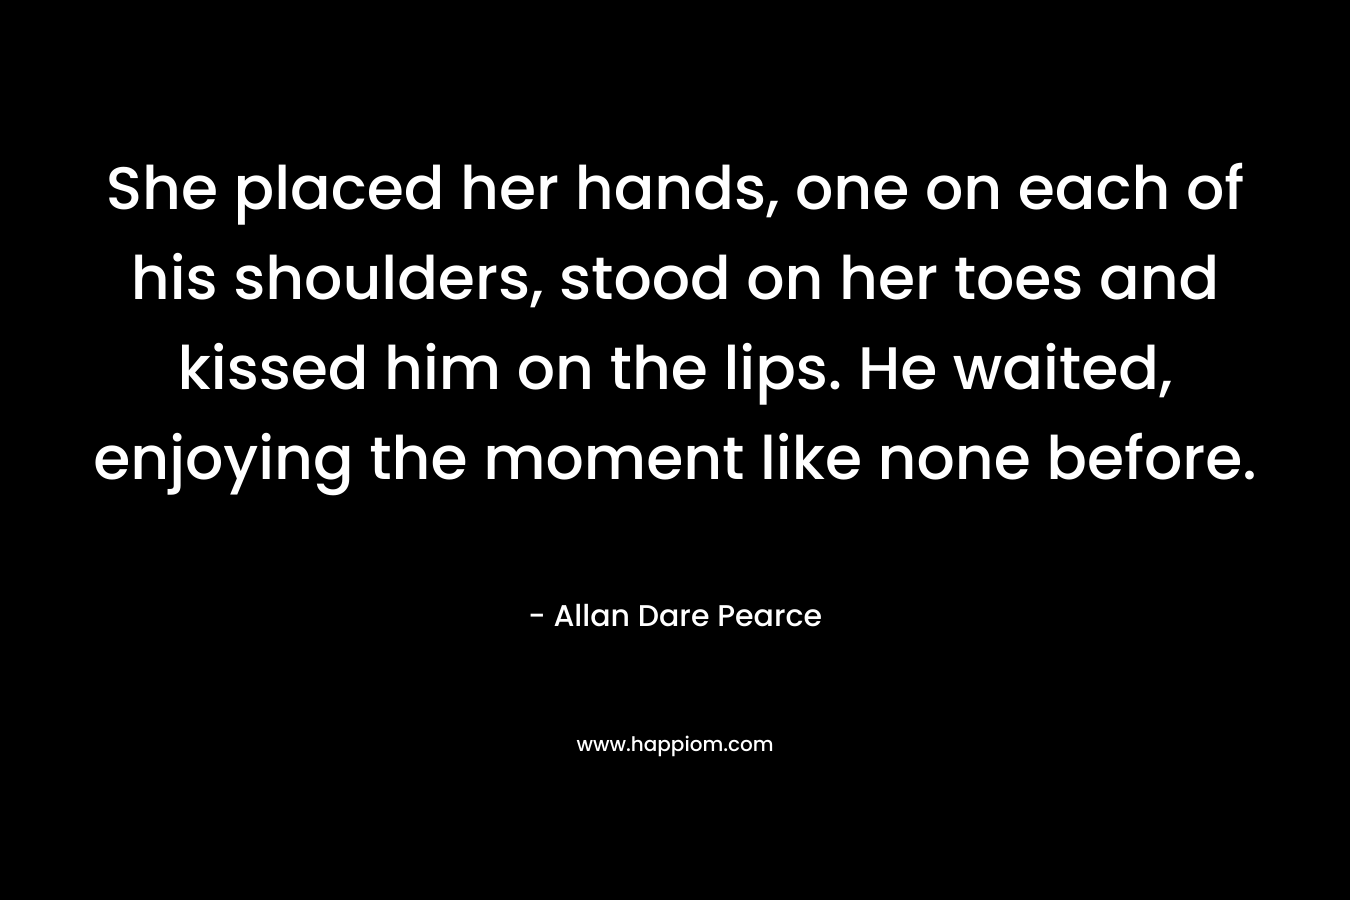 She placed her hands, one on each of his shoulders, stood on her toes and kissed him on the lips. He waited, enjoying the moment like none before. – Allan Dare Pearce